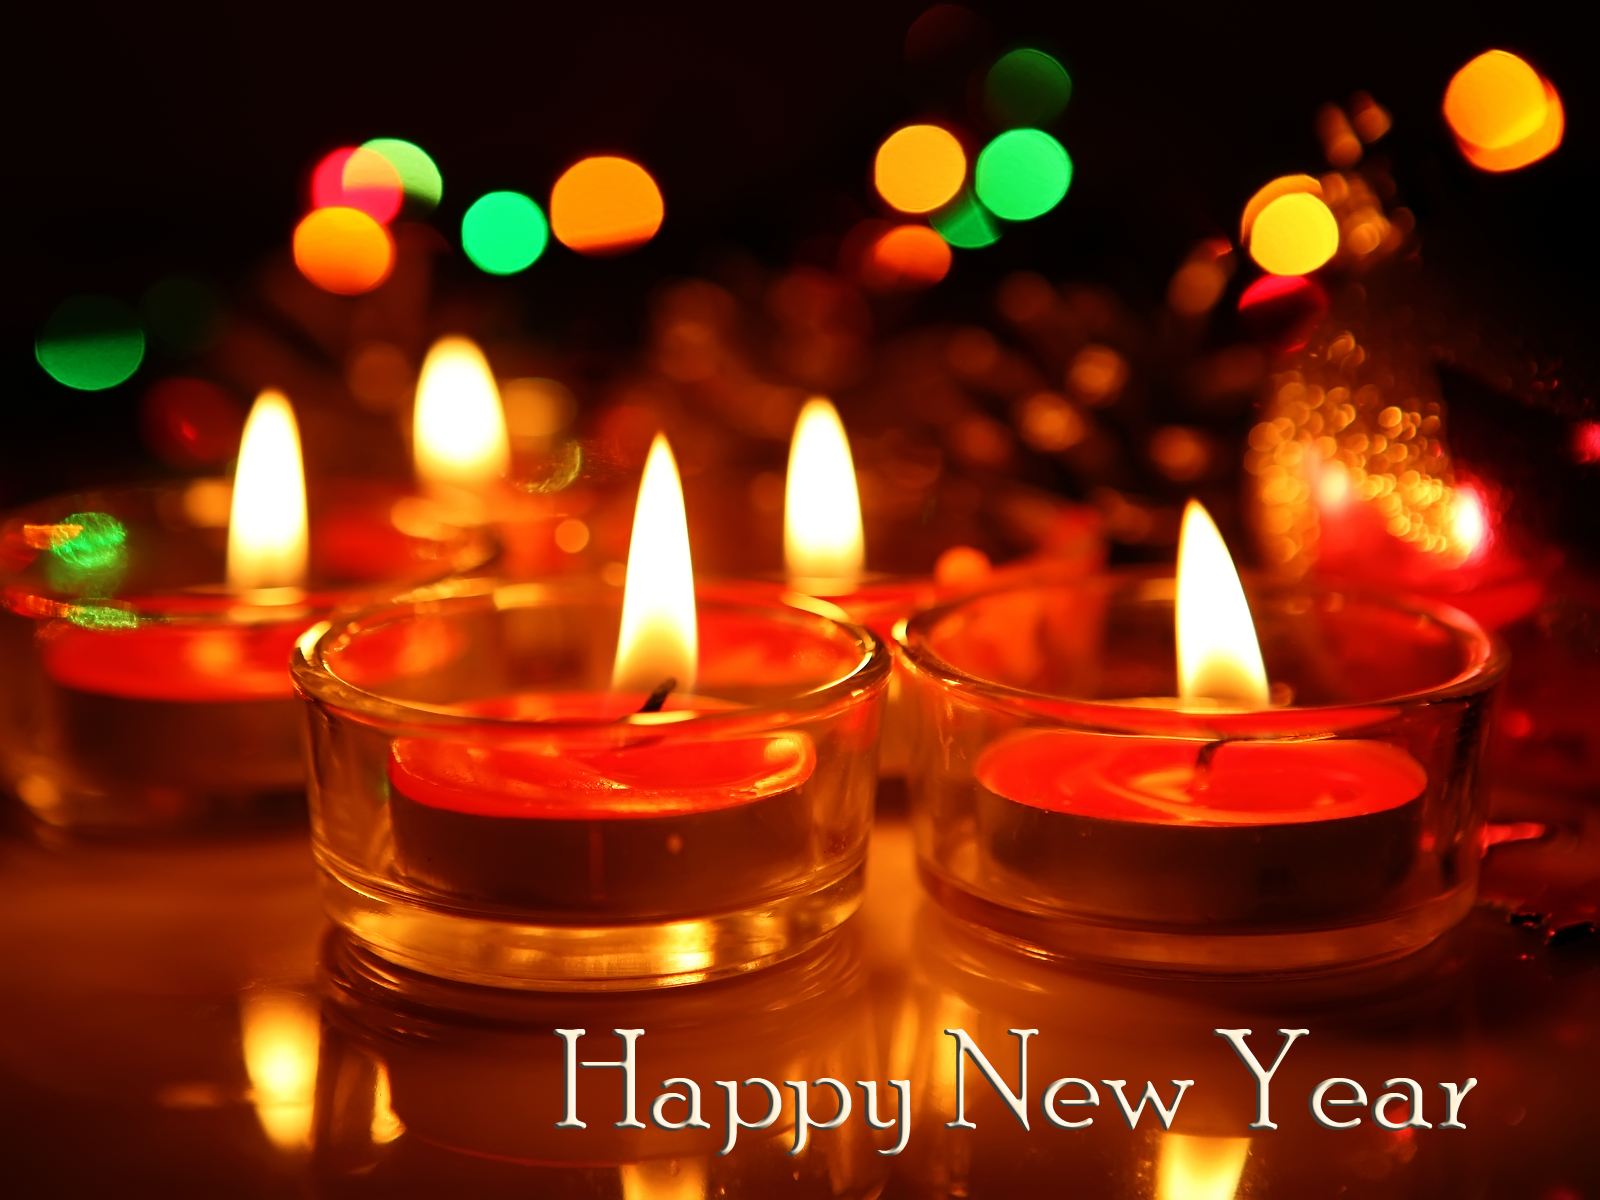 Happy New Year Wallpapers HD download 1600x1200